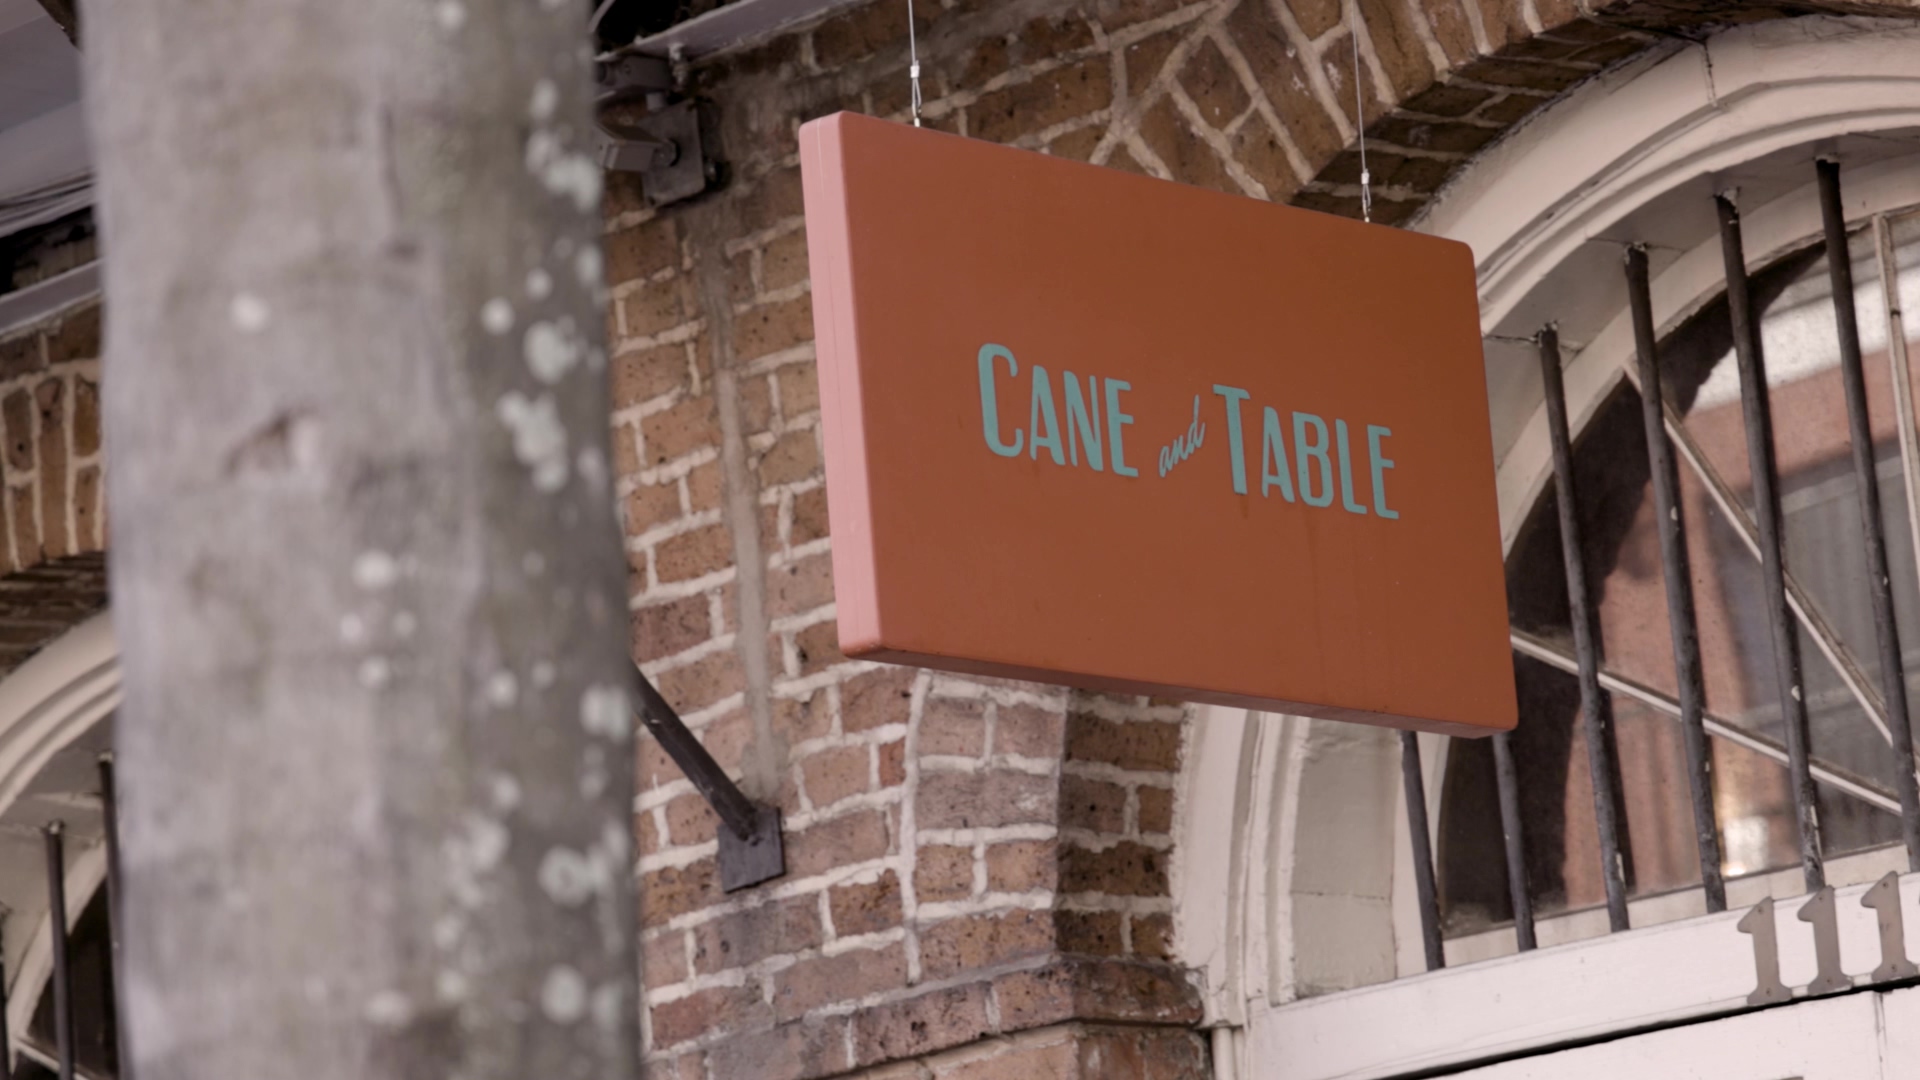 A day in the life - Cane and Table